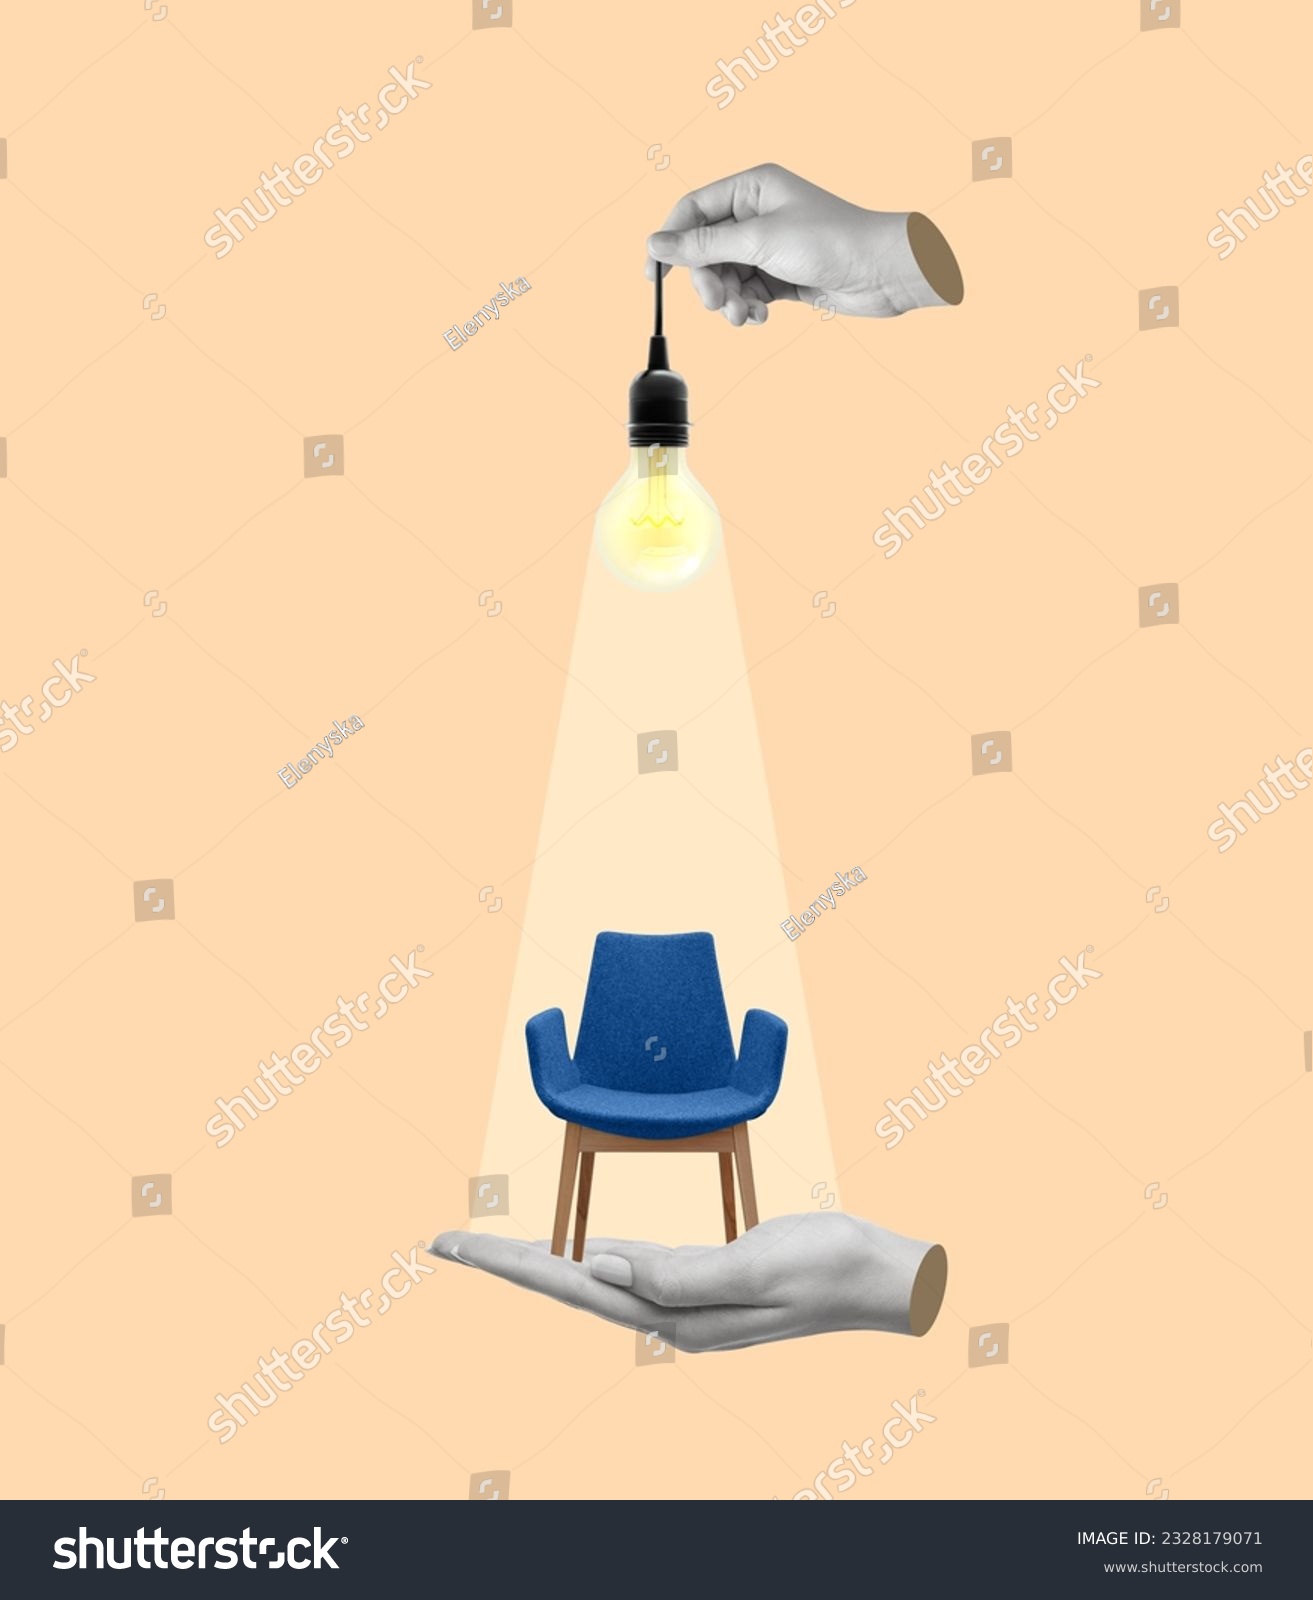 A hand holds a light bulb on an office chair. Contemporary art collage. Hiring and recruitment concept. Modern design. #2328179071